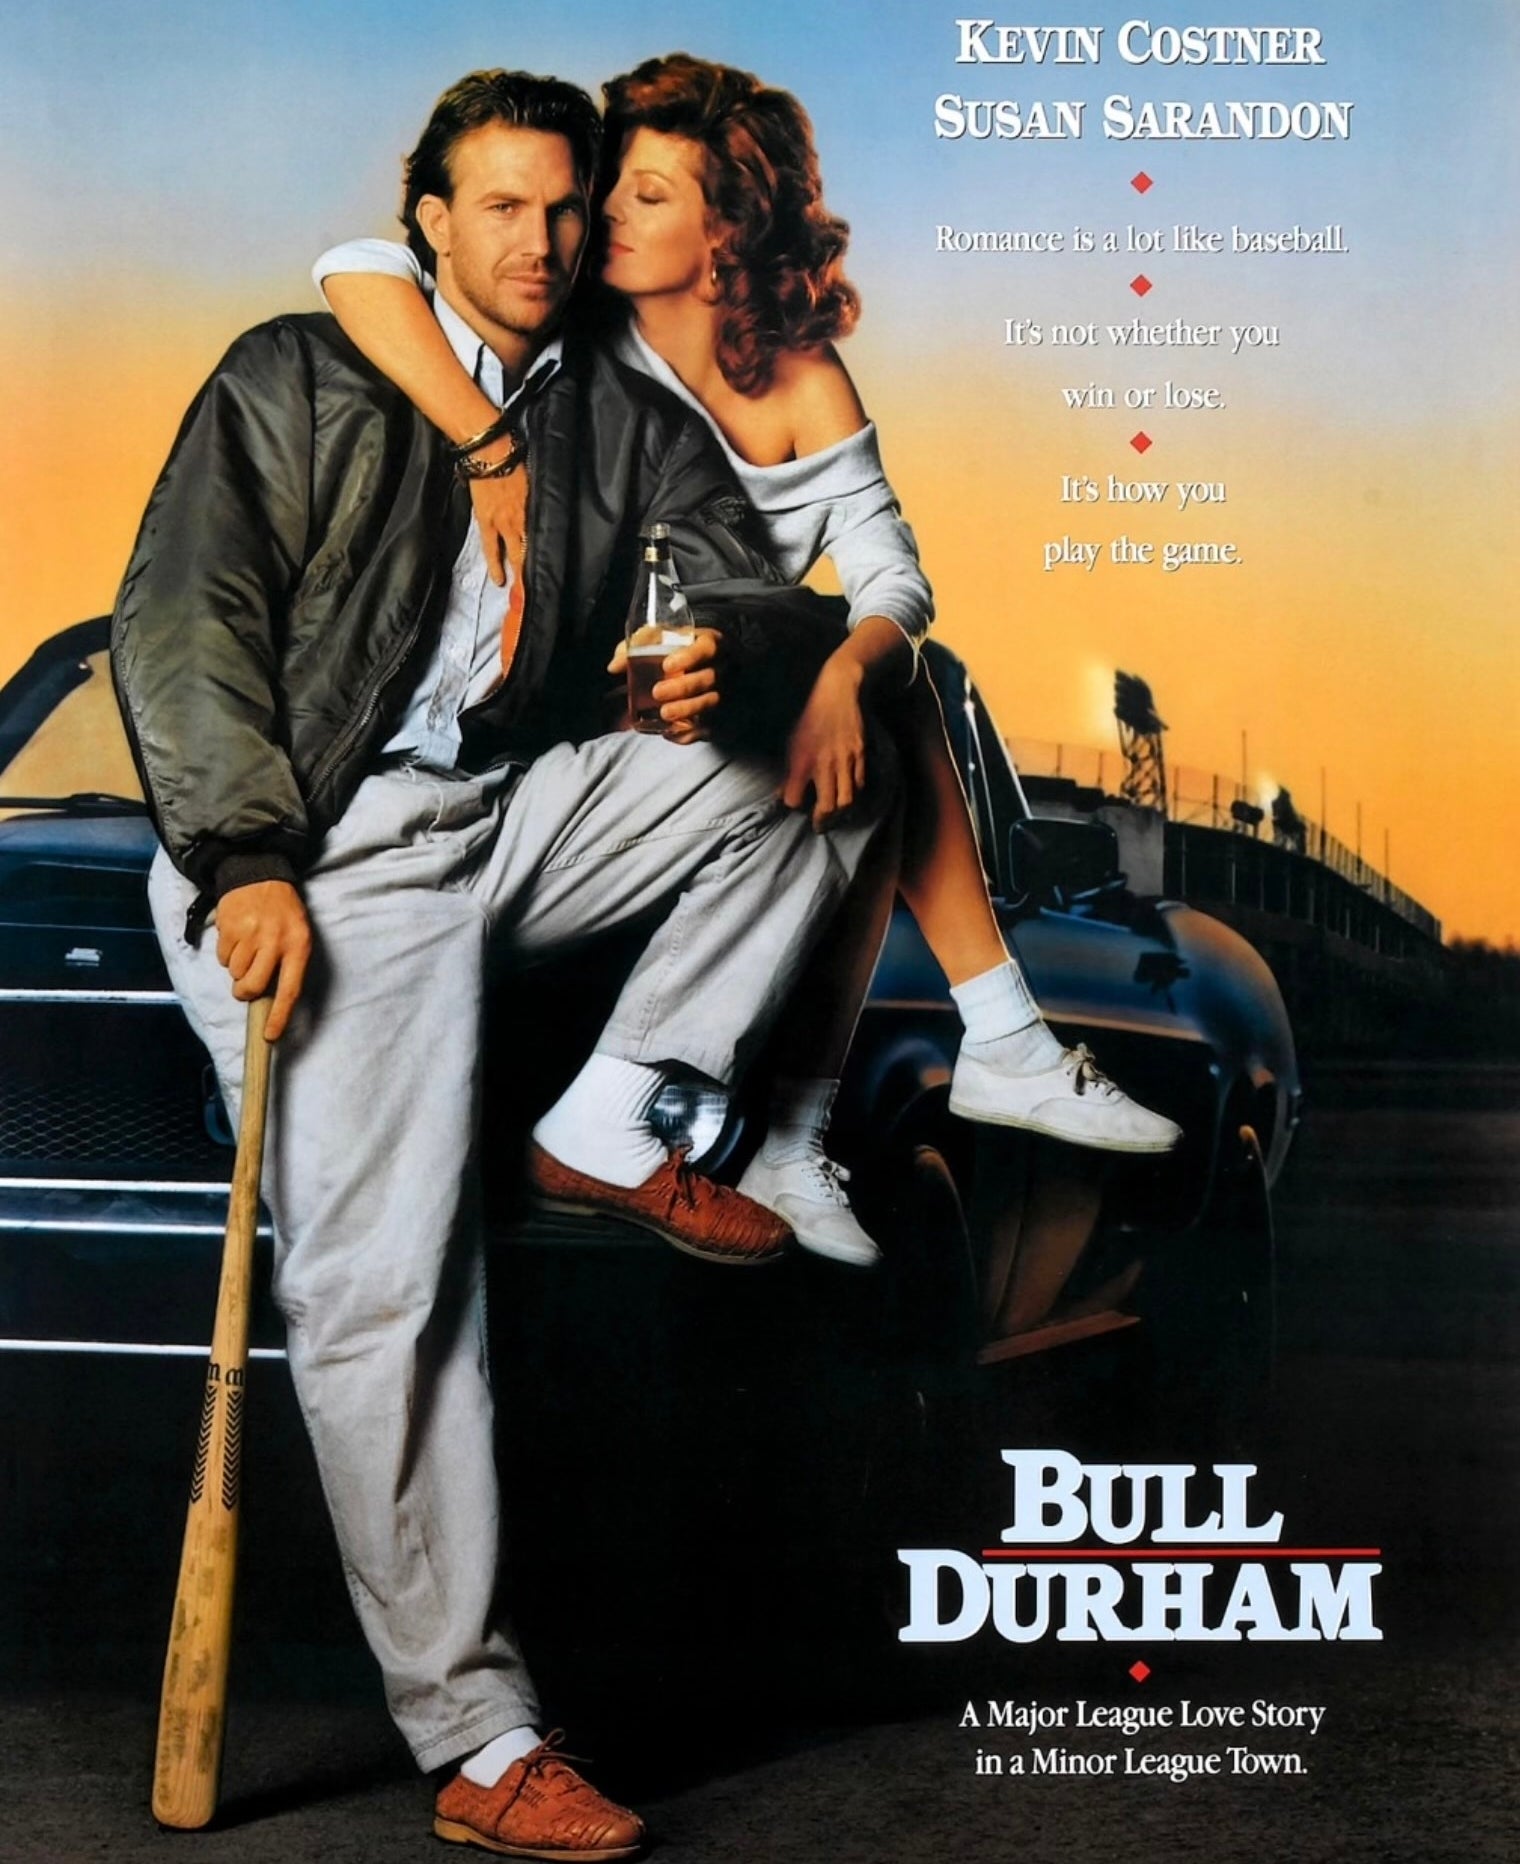 Movie poster of &quot;Bull Durham&quot; with Kevin Costner and Susan Sarandon leaning on a car. Costner holds a bat; Sarandon, a drink